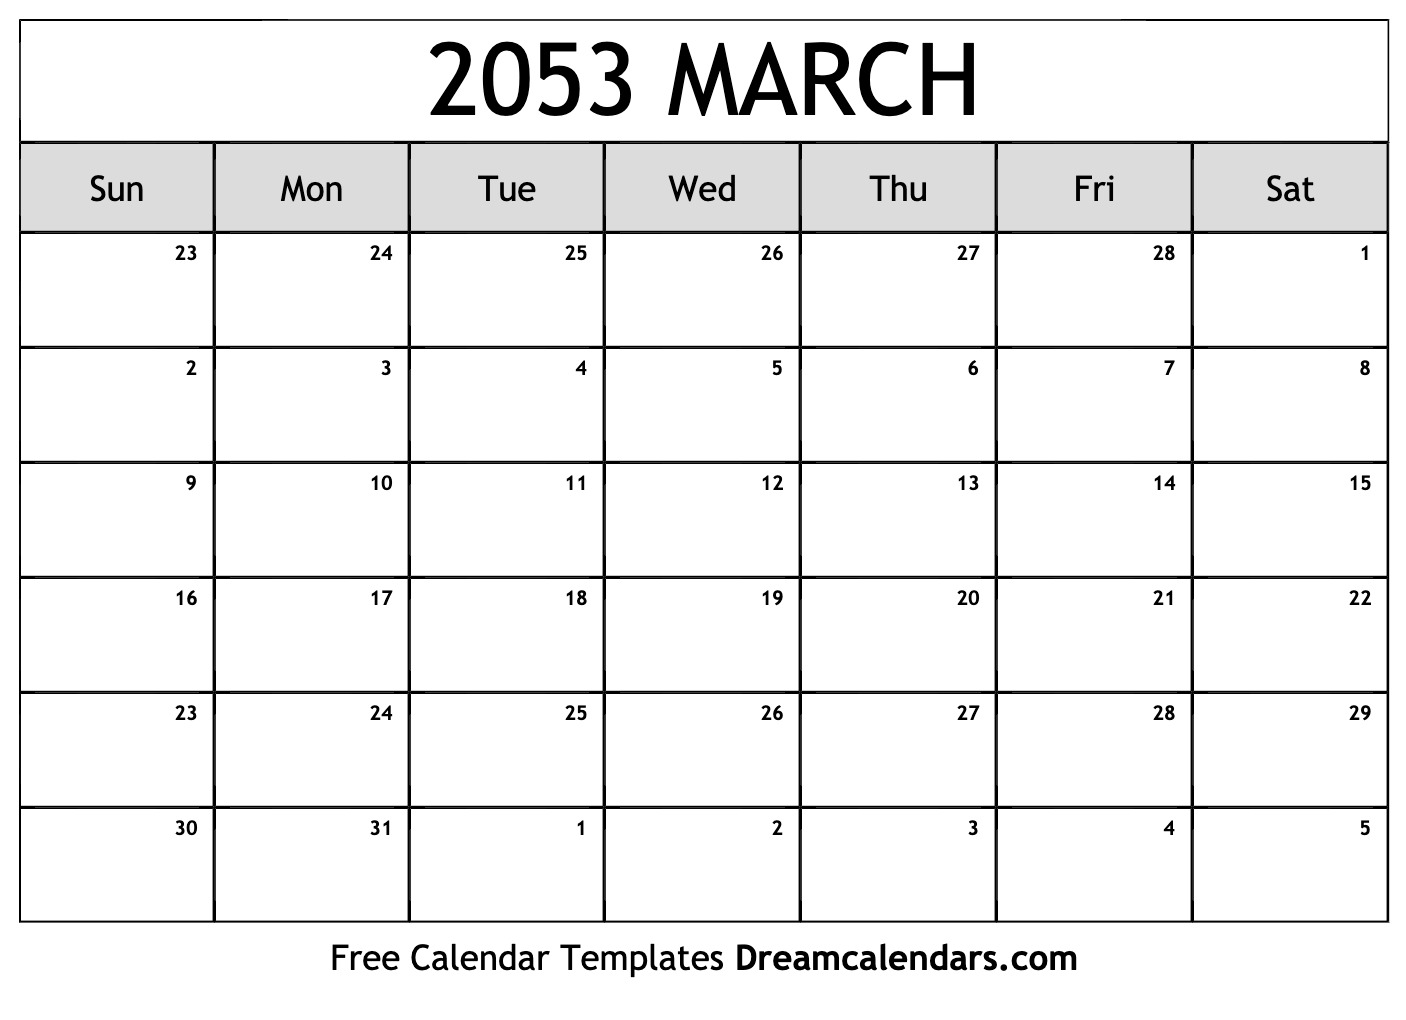 March 2053 Calendar Free Blank Printable With Holidays